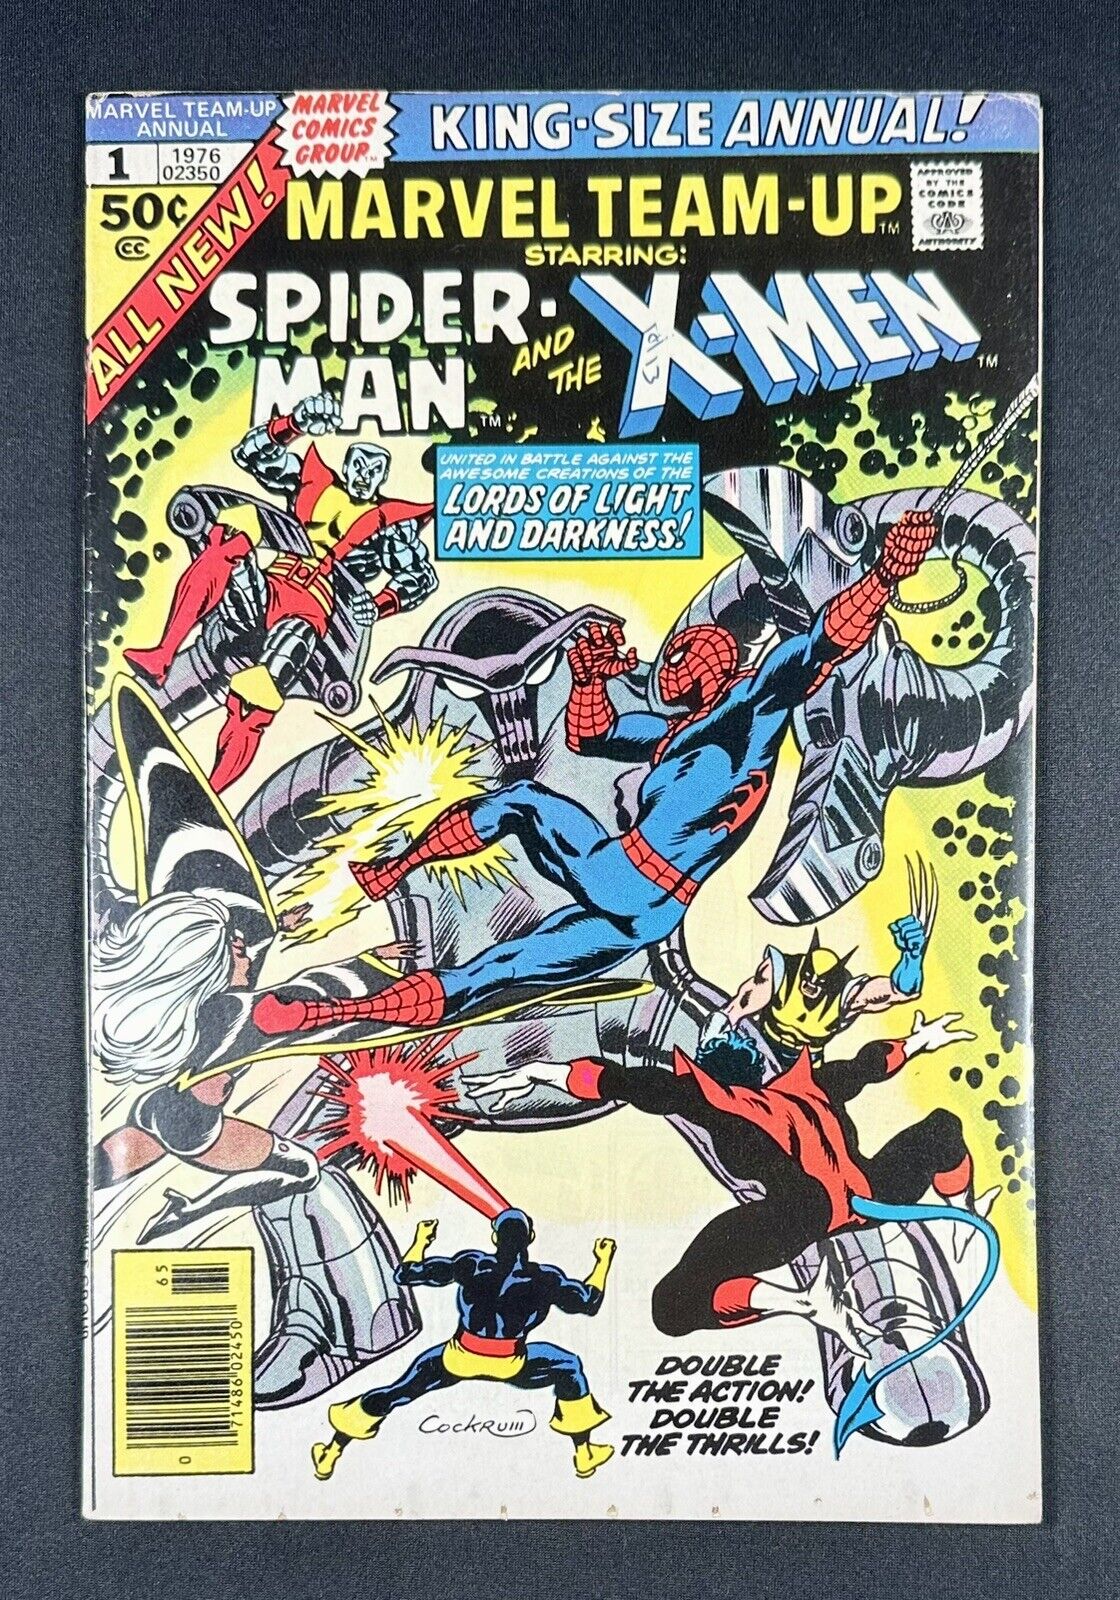 Marvel Team-Up Annual # 1 - New X-Men, 2nd Phoenix, Cockrum Cover VF Cond.